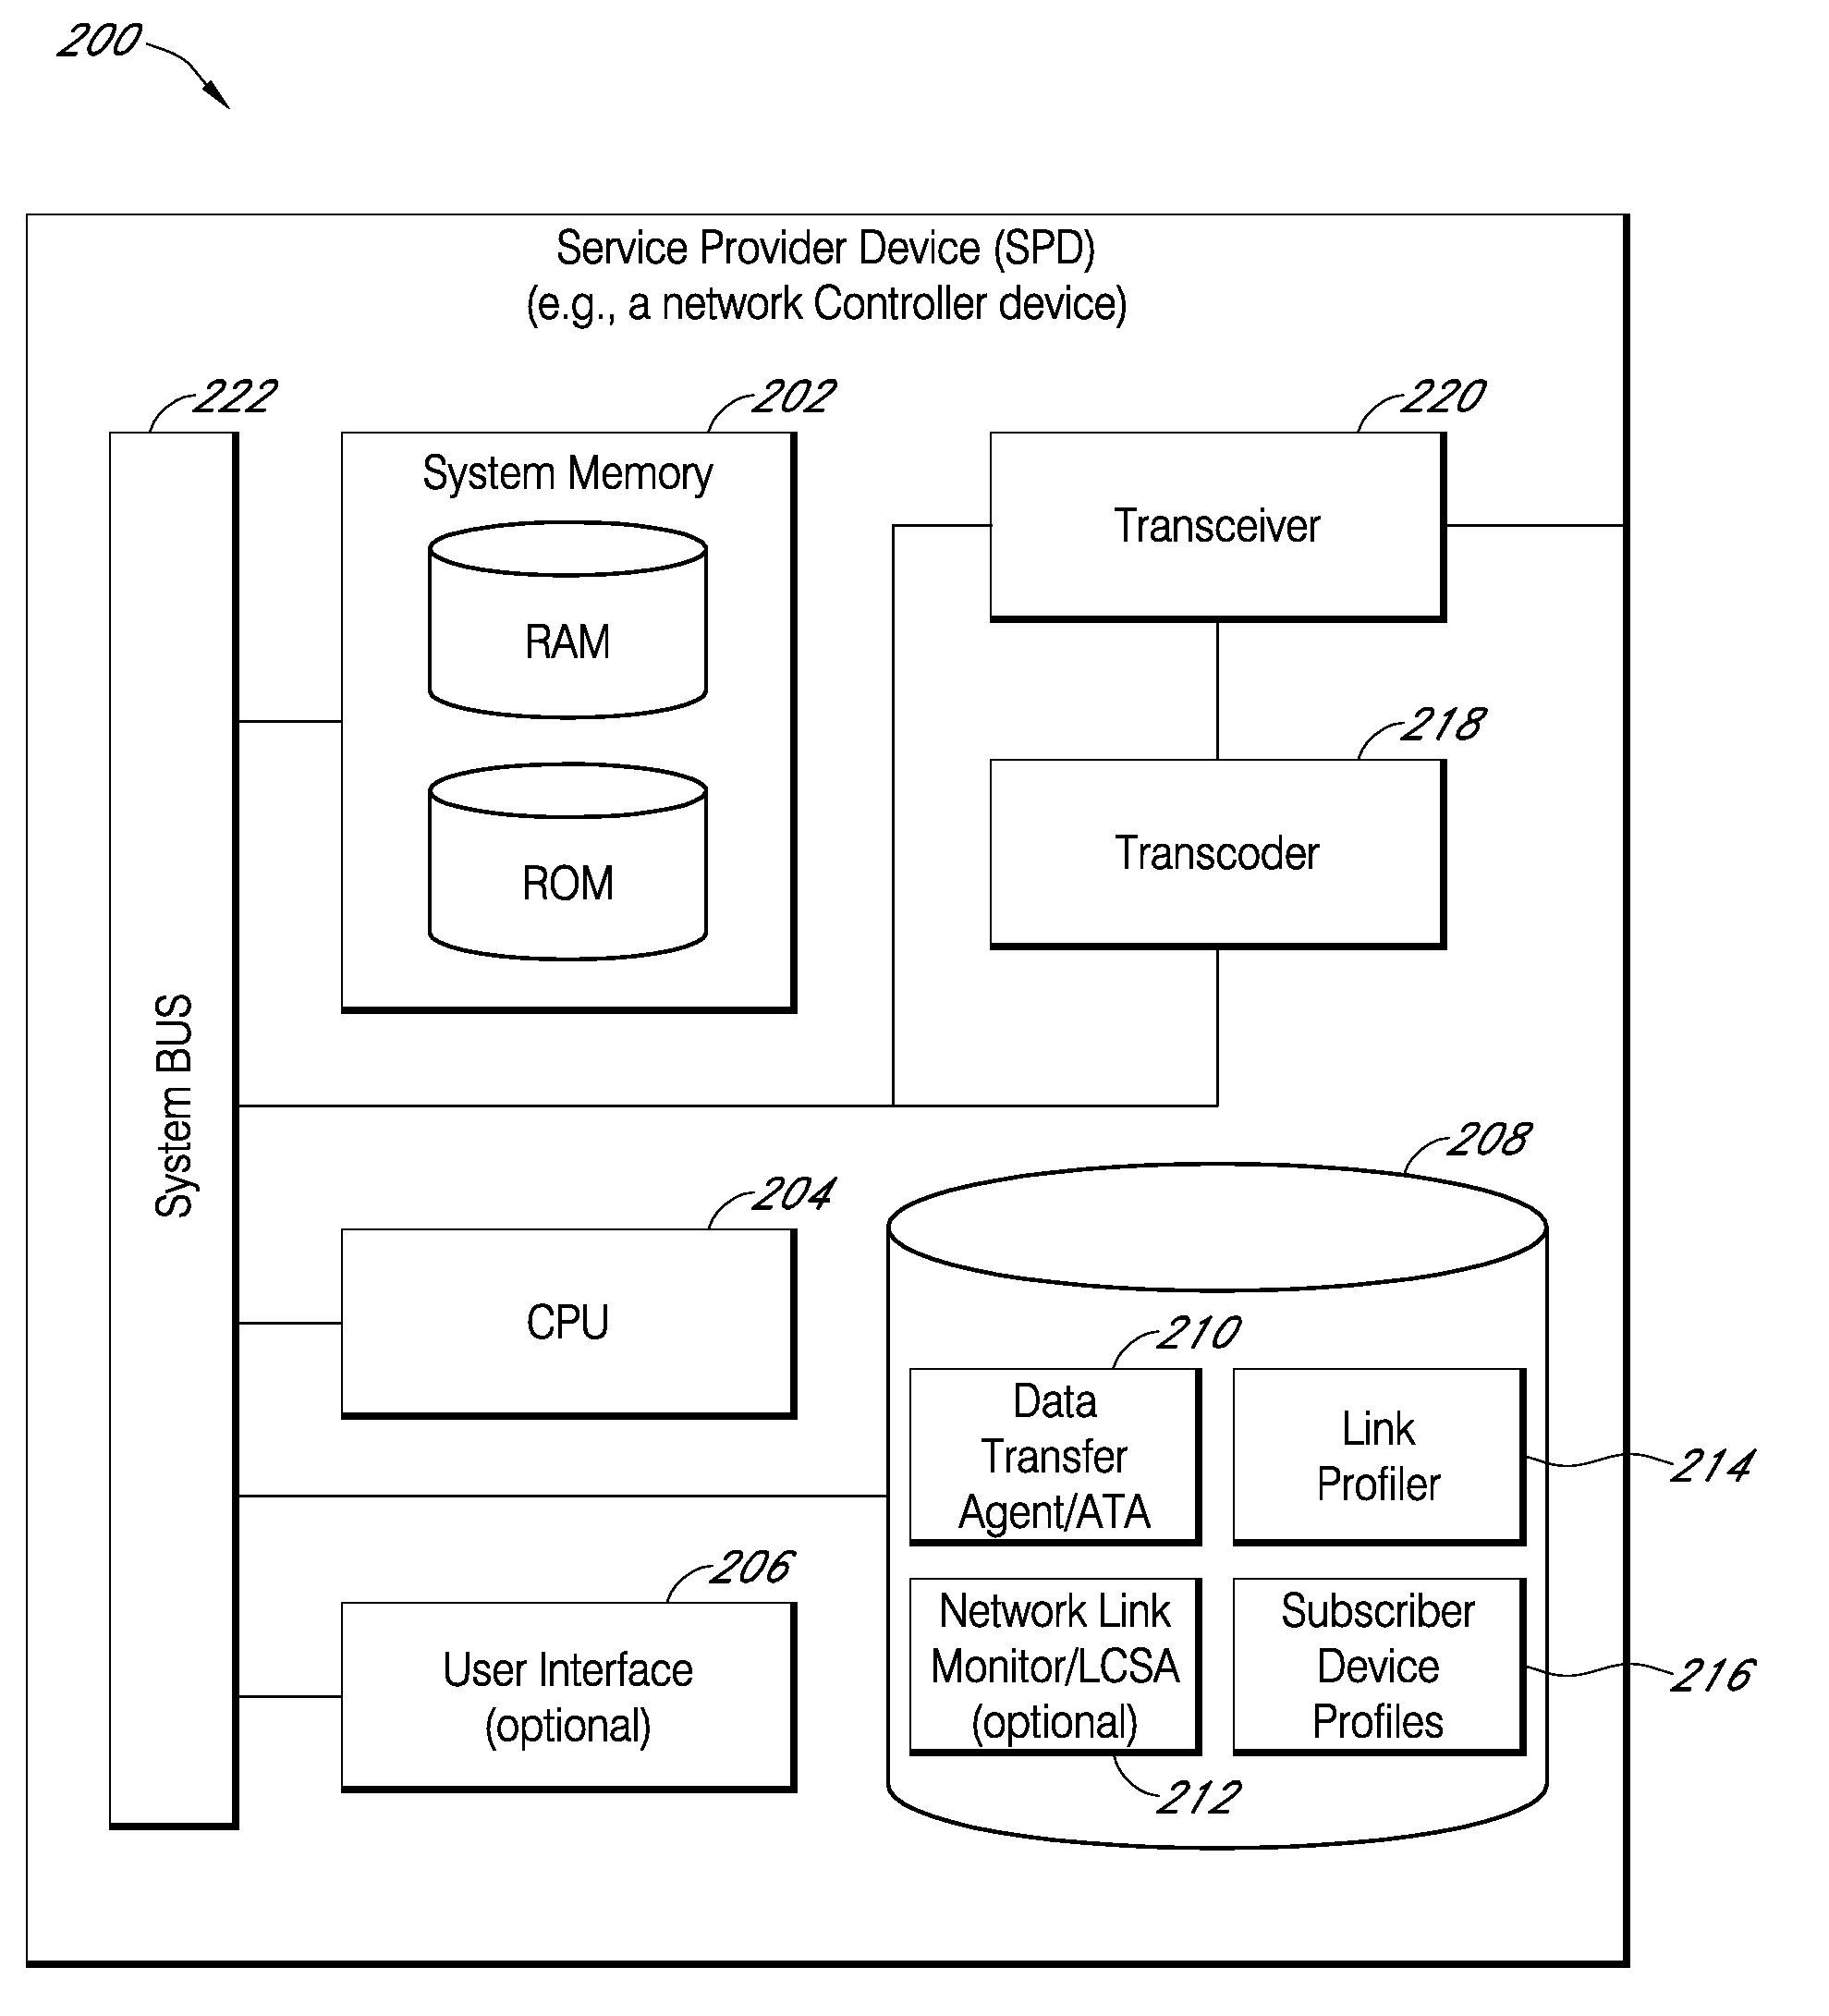 Systems and methods for enhanced data delivery based on real time analysis of network communications quality and traffic